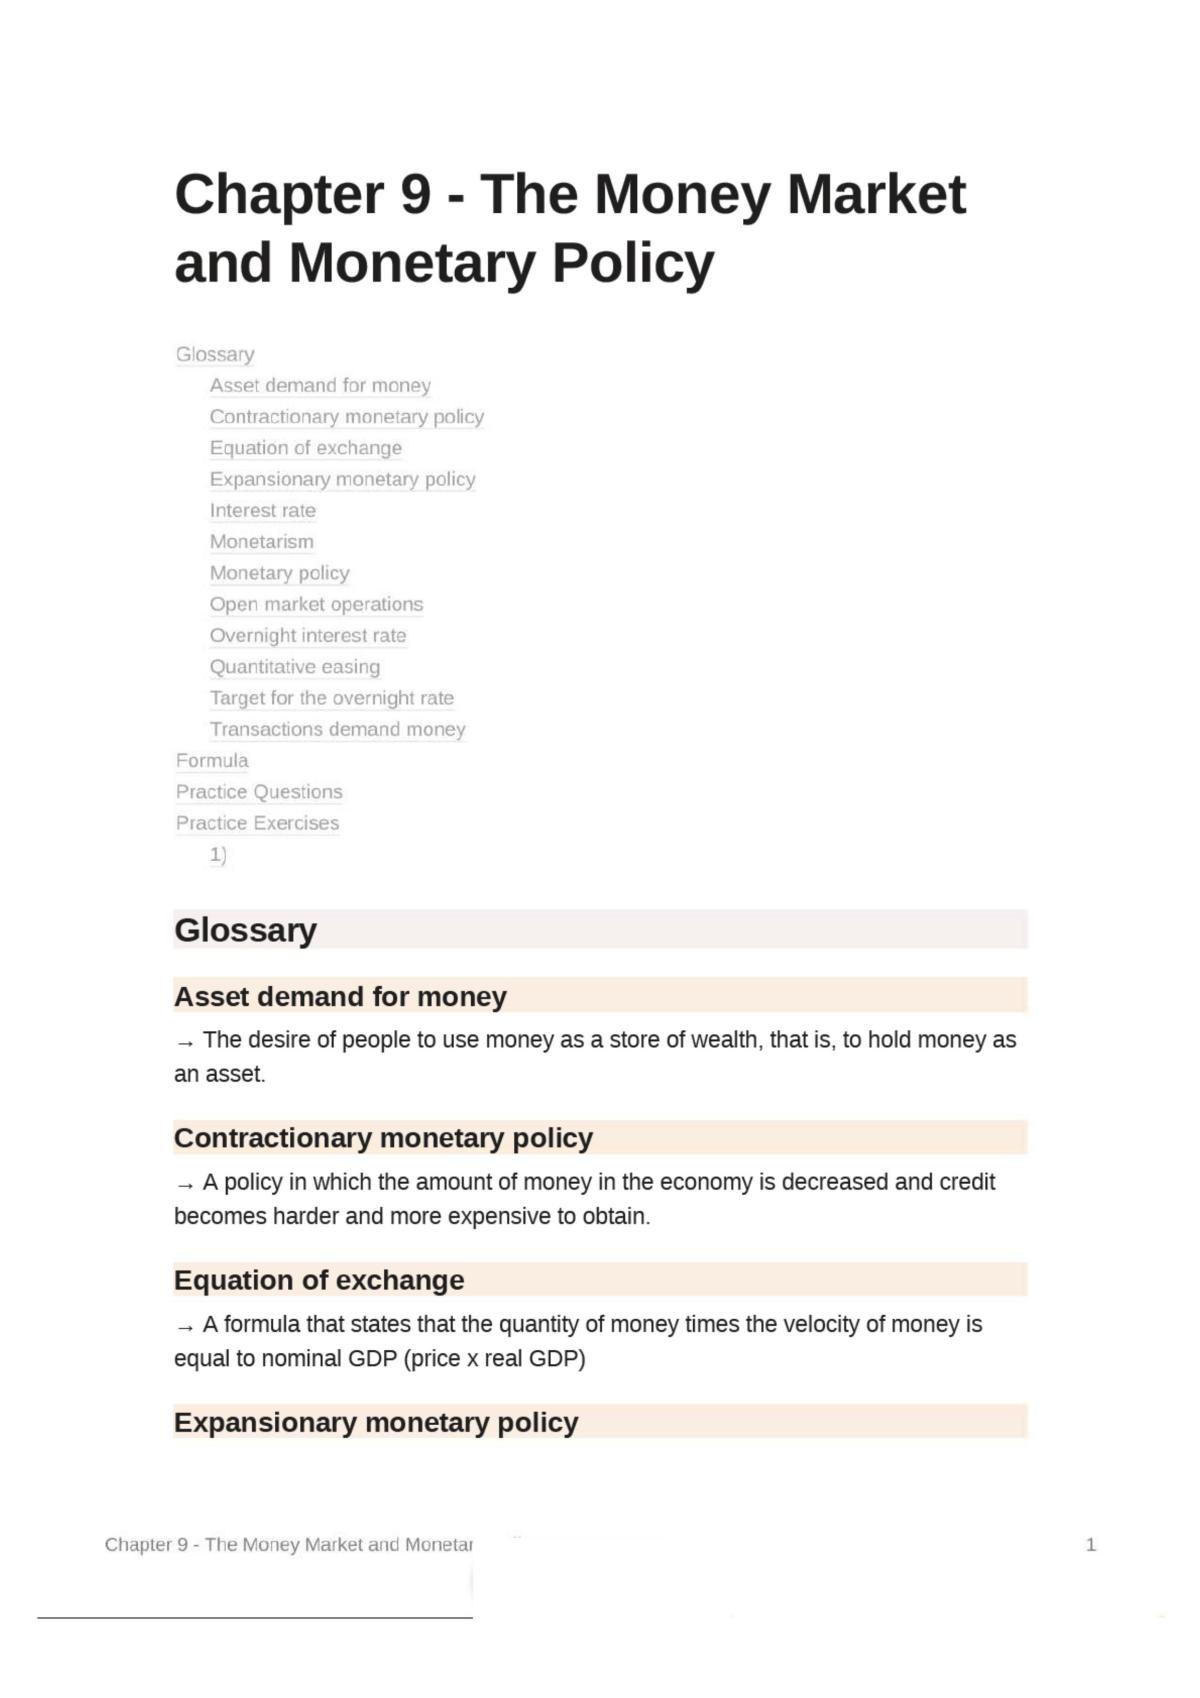 The Money Market and Monetary Policy Notes - Page 1